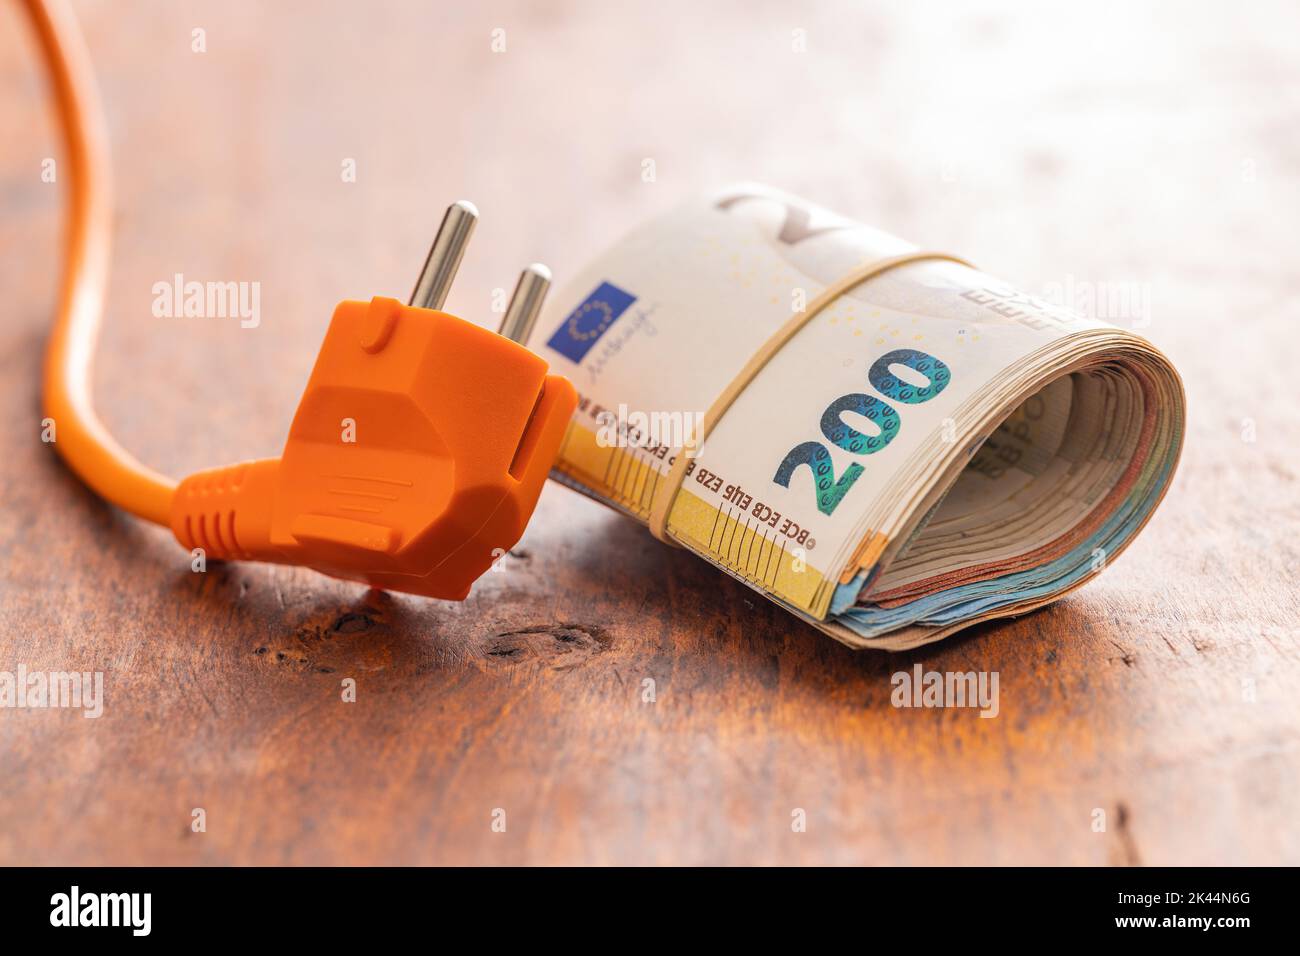 Electric plug and the euro money on wooden table. Concept of increasing electric prices. Stock Photo